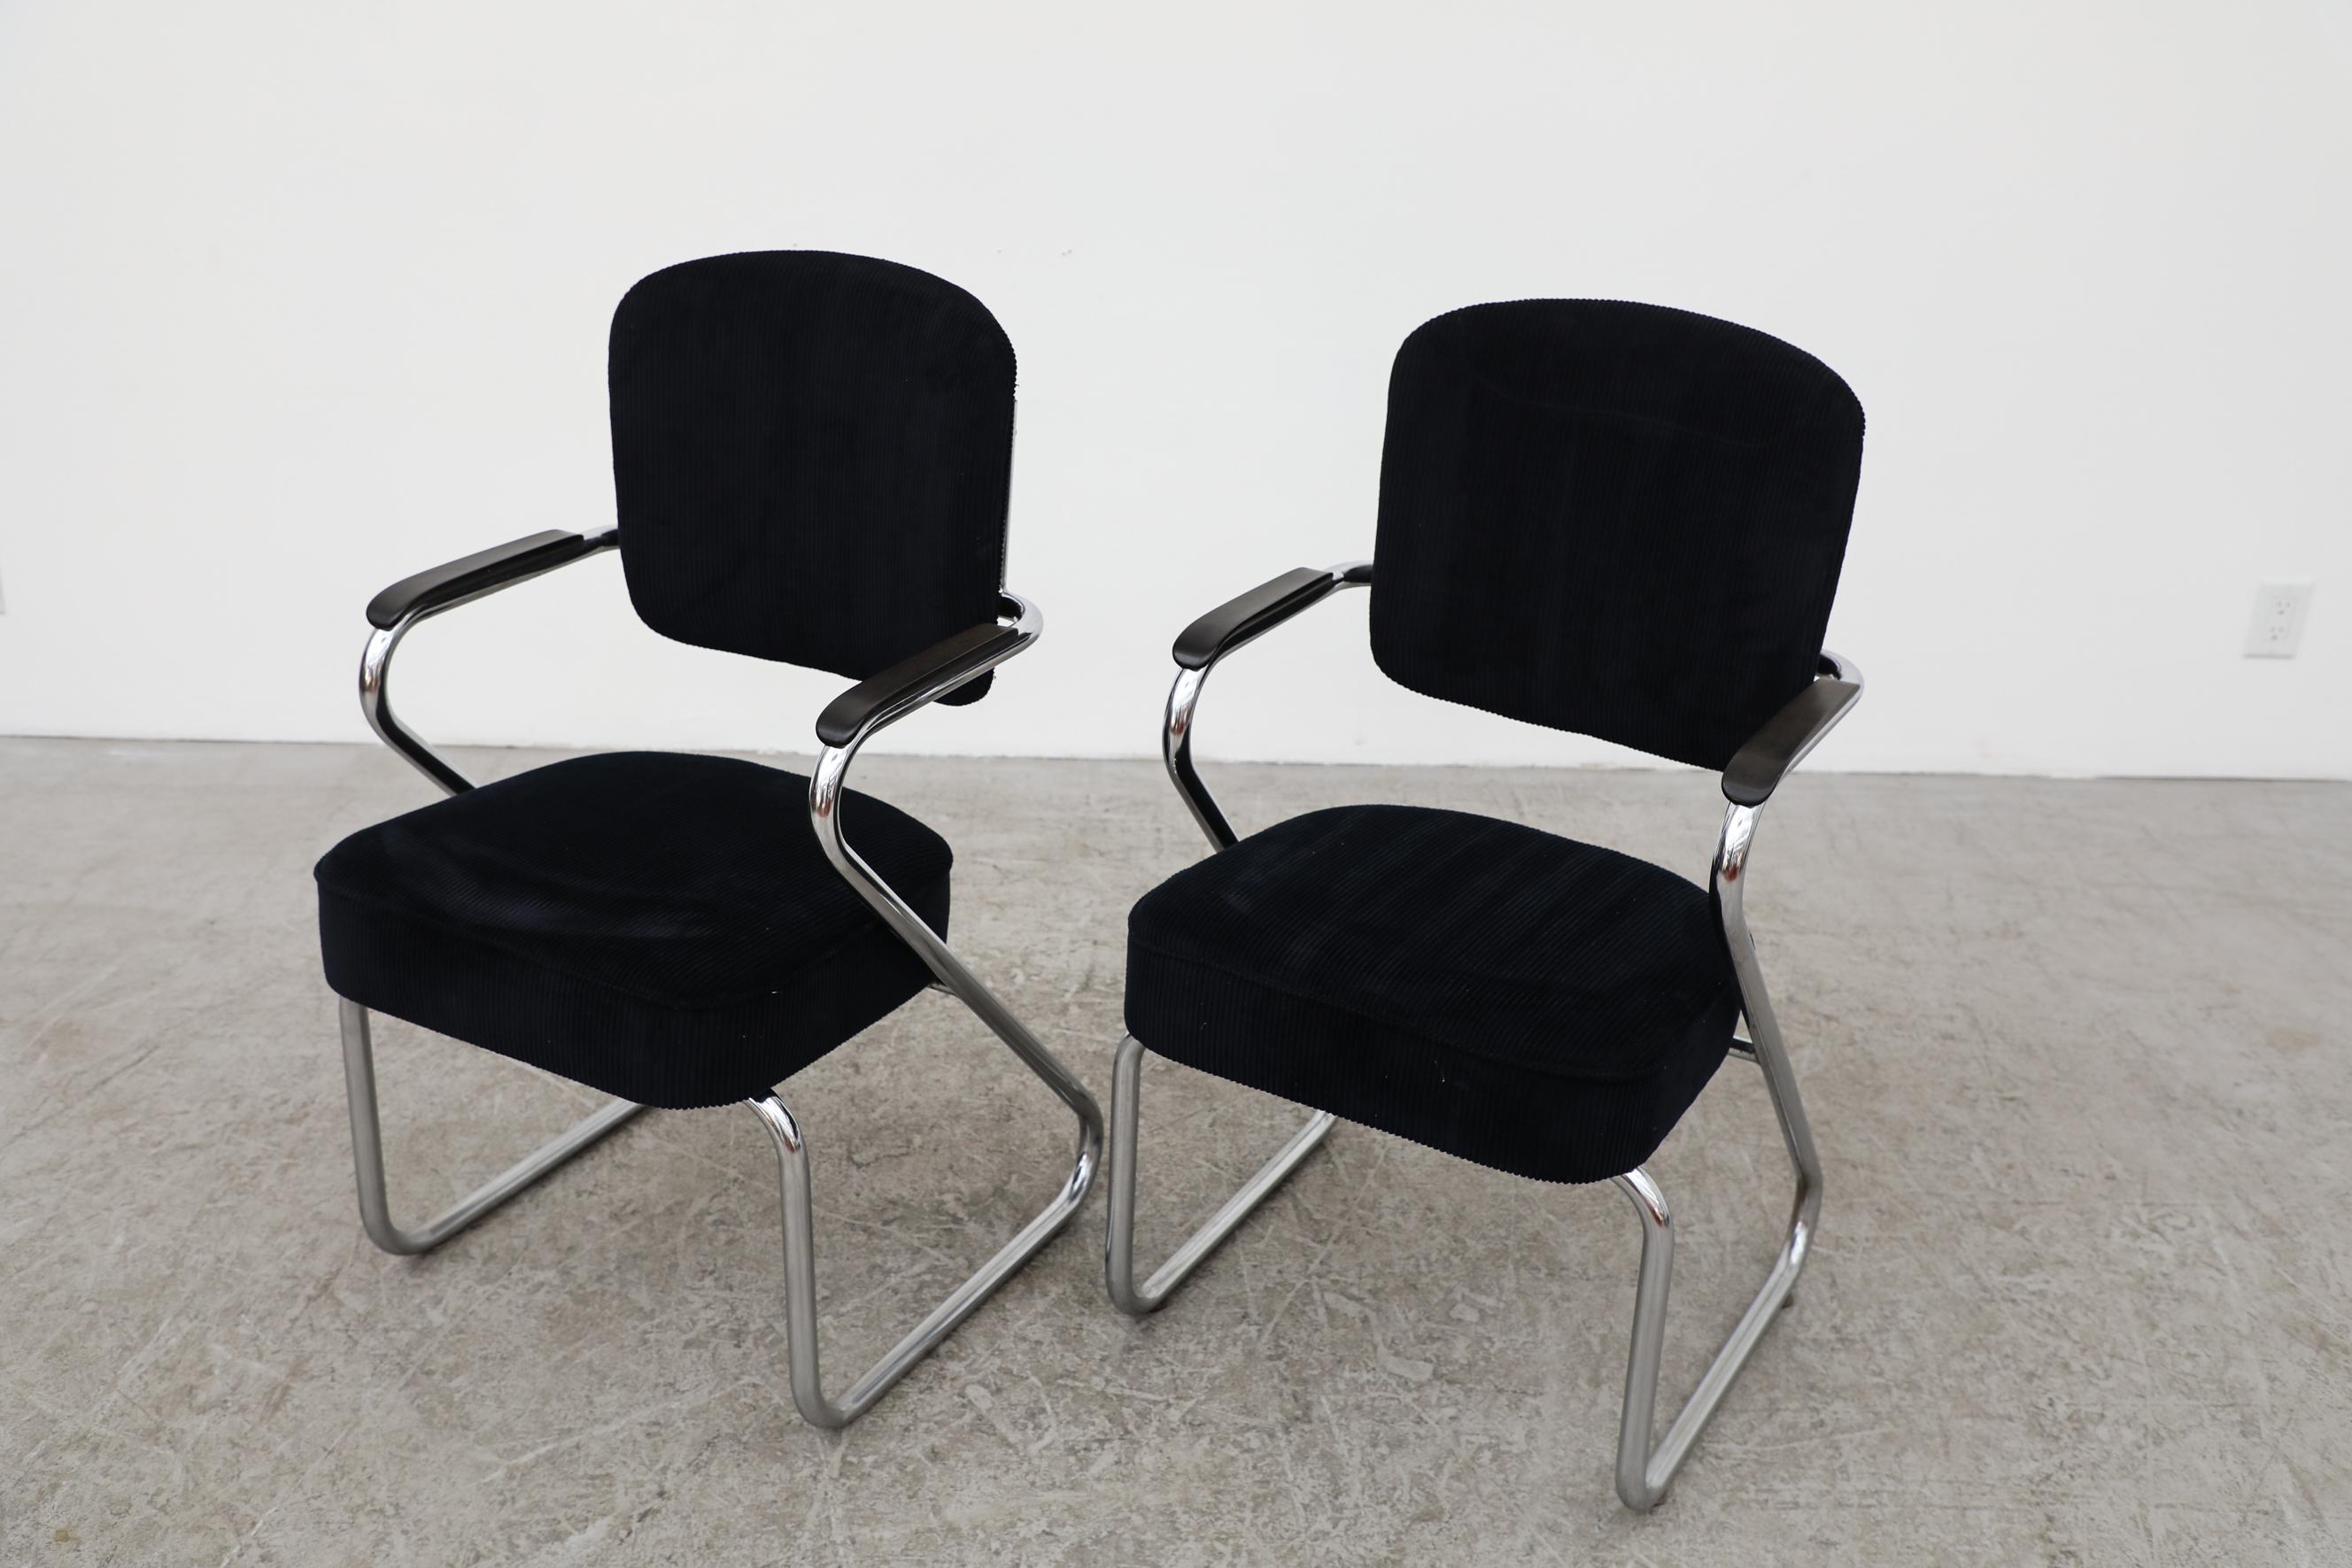 Mid-20th Century Corduroy Chairs by Paul Schuitema for Fana Metaal Rotterdam, 1950s For Sale